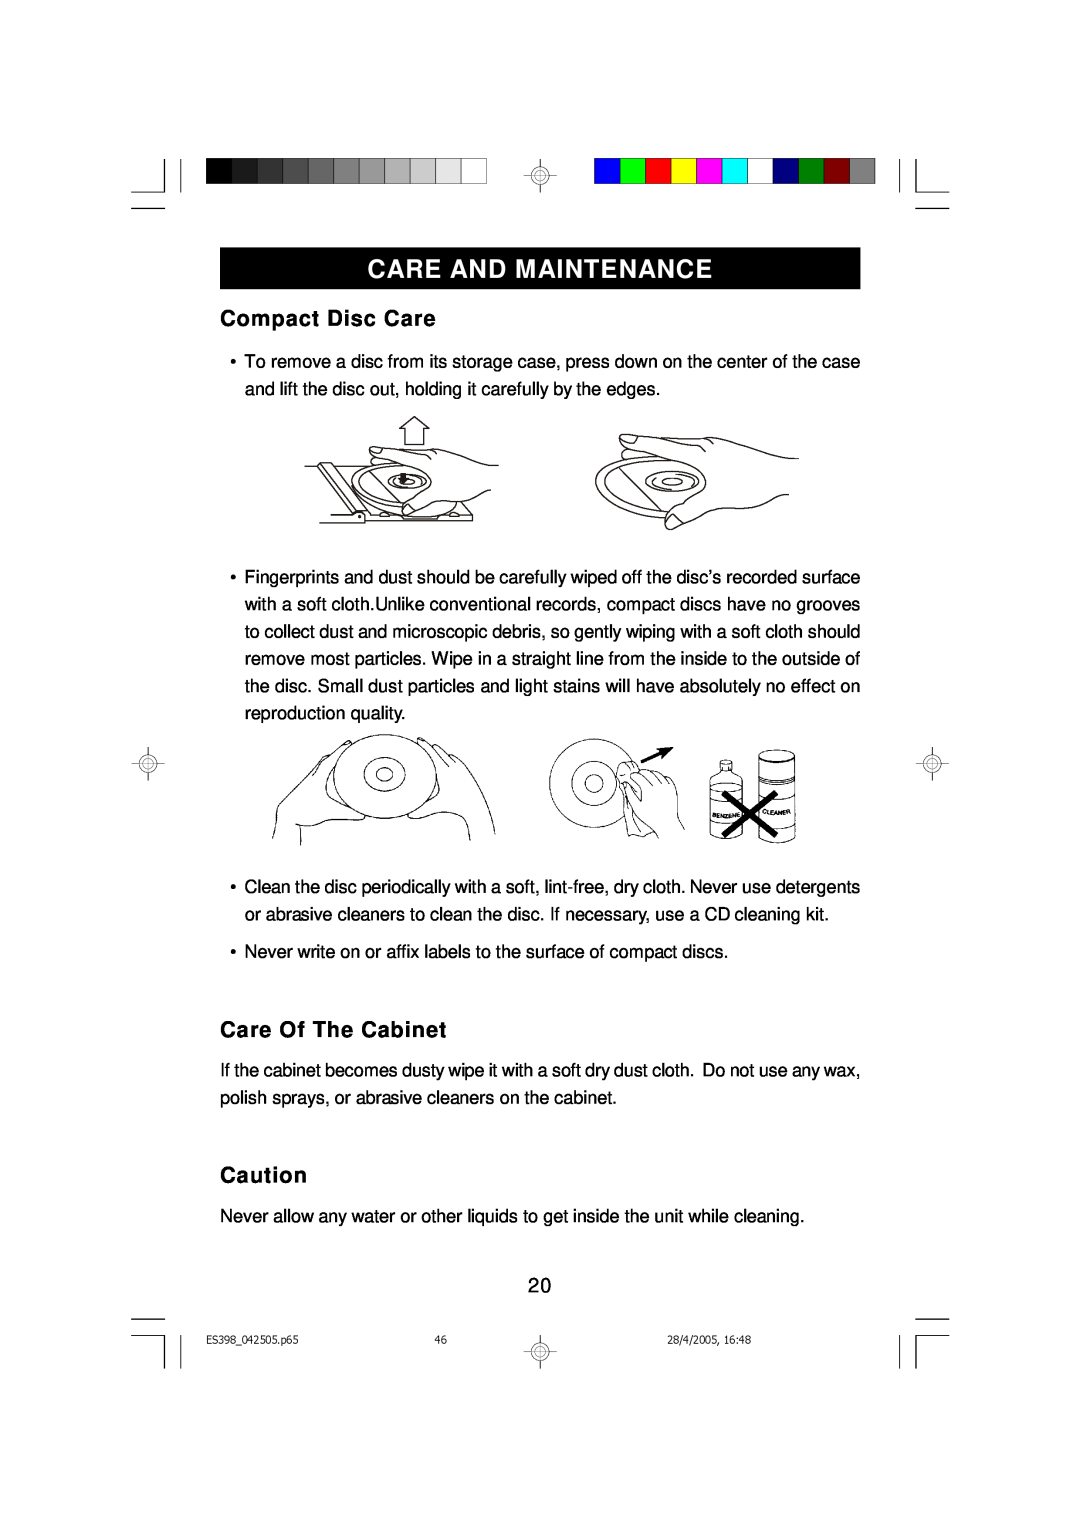 Emerson ES398 owner manual Care And Maintenance, Compact Disc Care, Care Of The Cabinet 